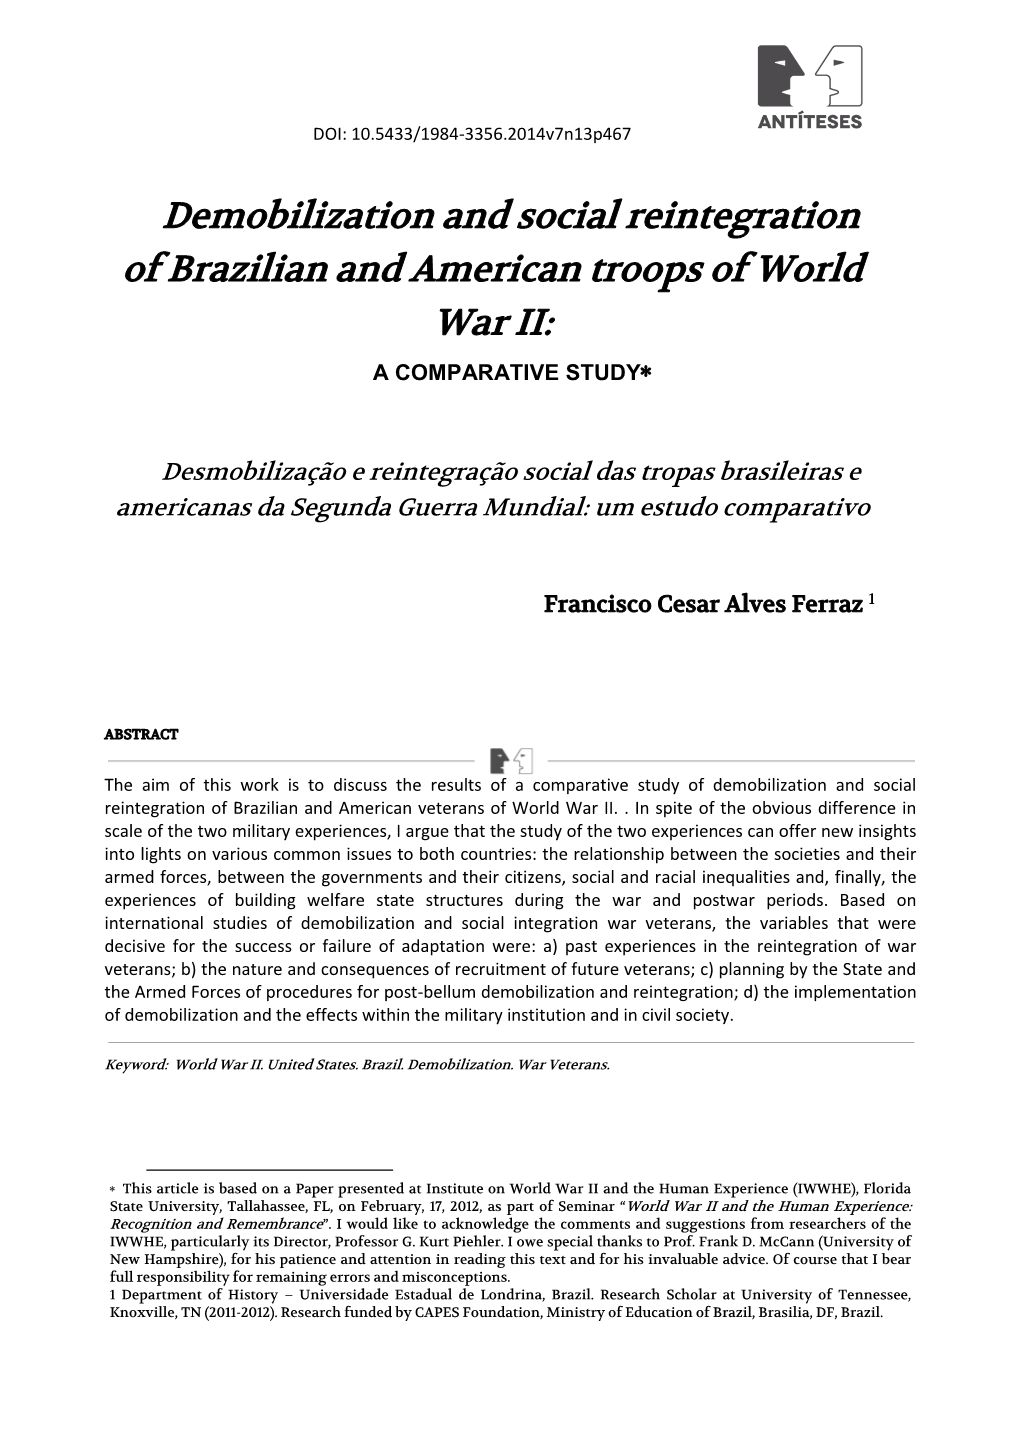 Demobilization and Social Reintegration of Brazilian and American Troops of World War II: a COMPARATIVE STUDY